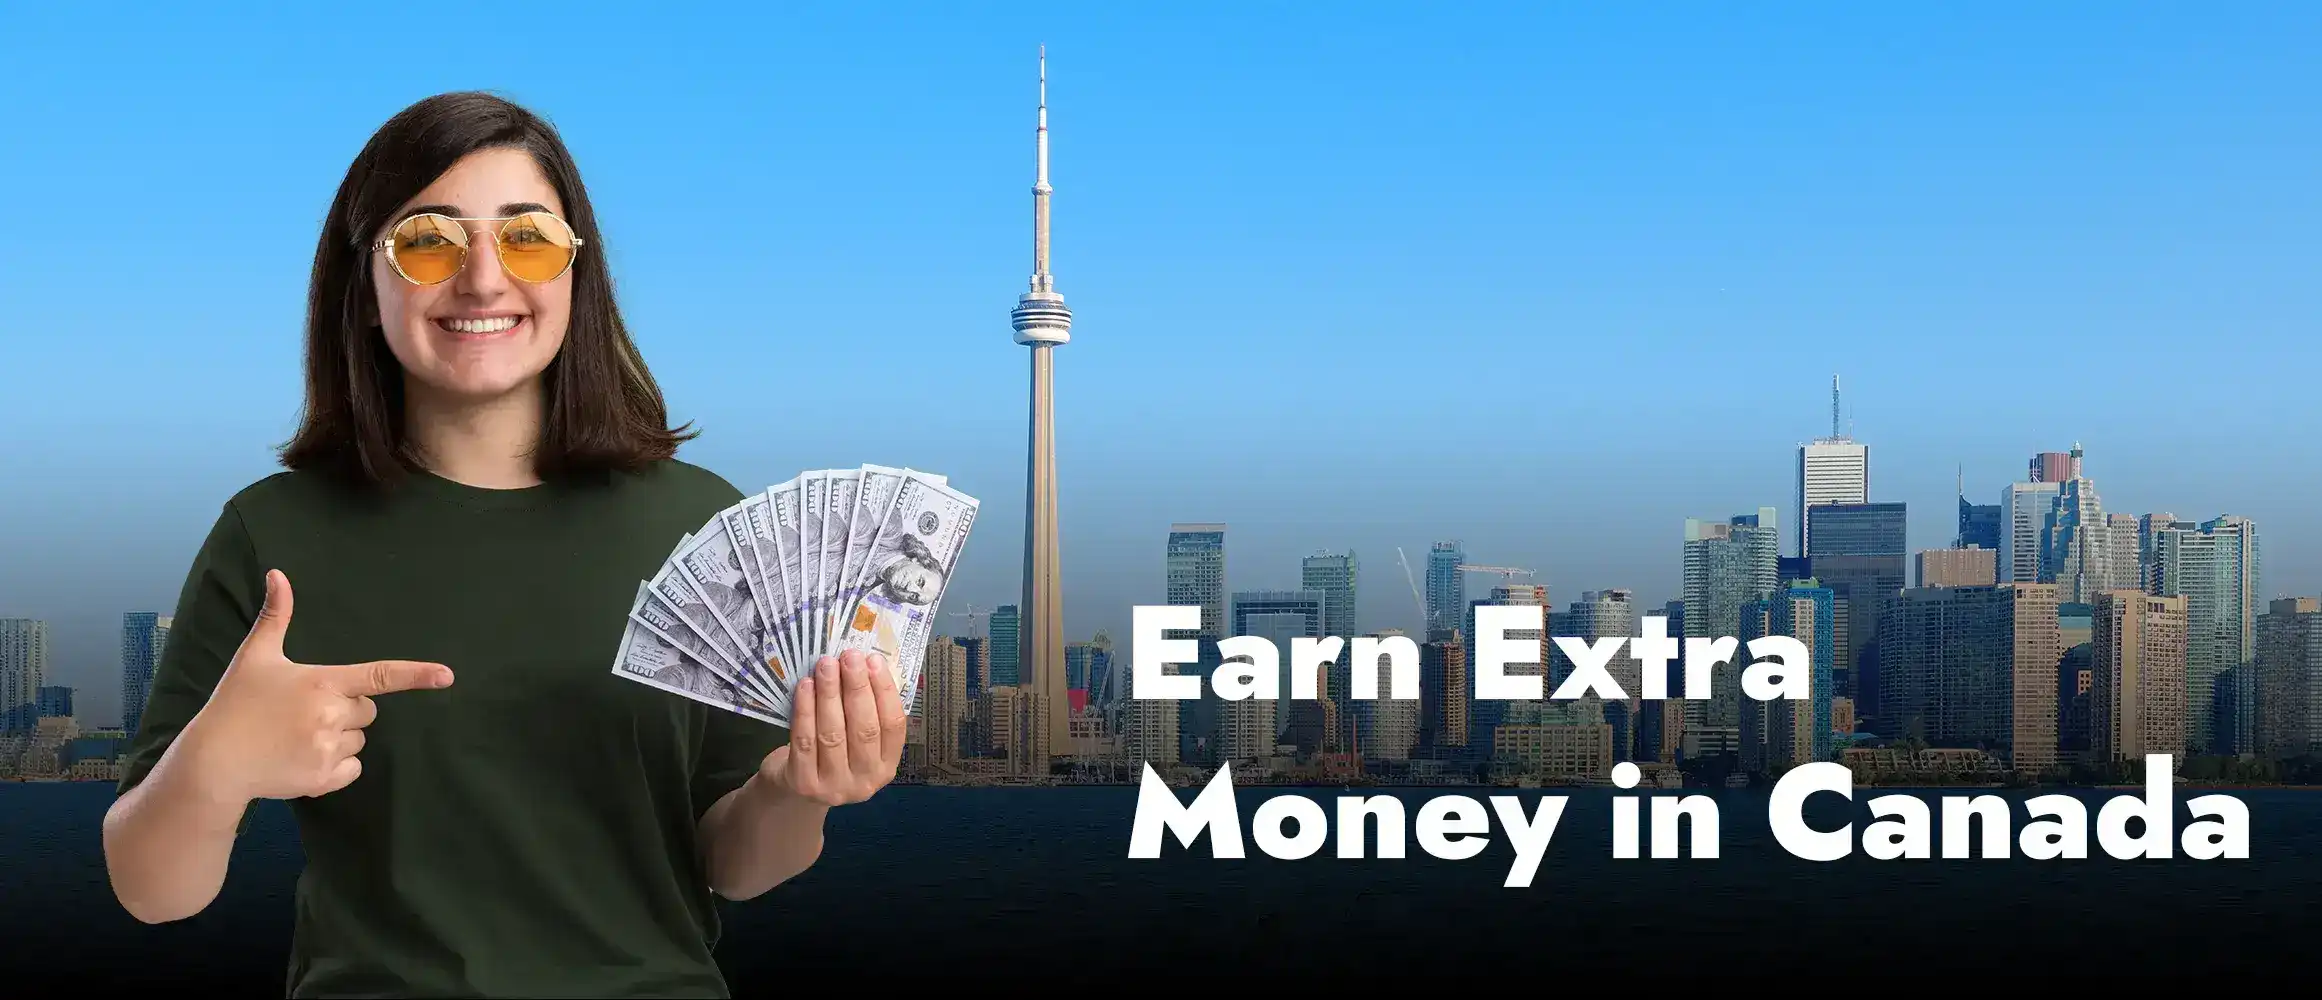 How can an International Student Earn Extra Money in Canada